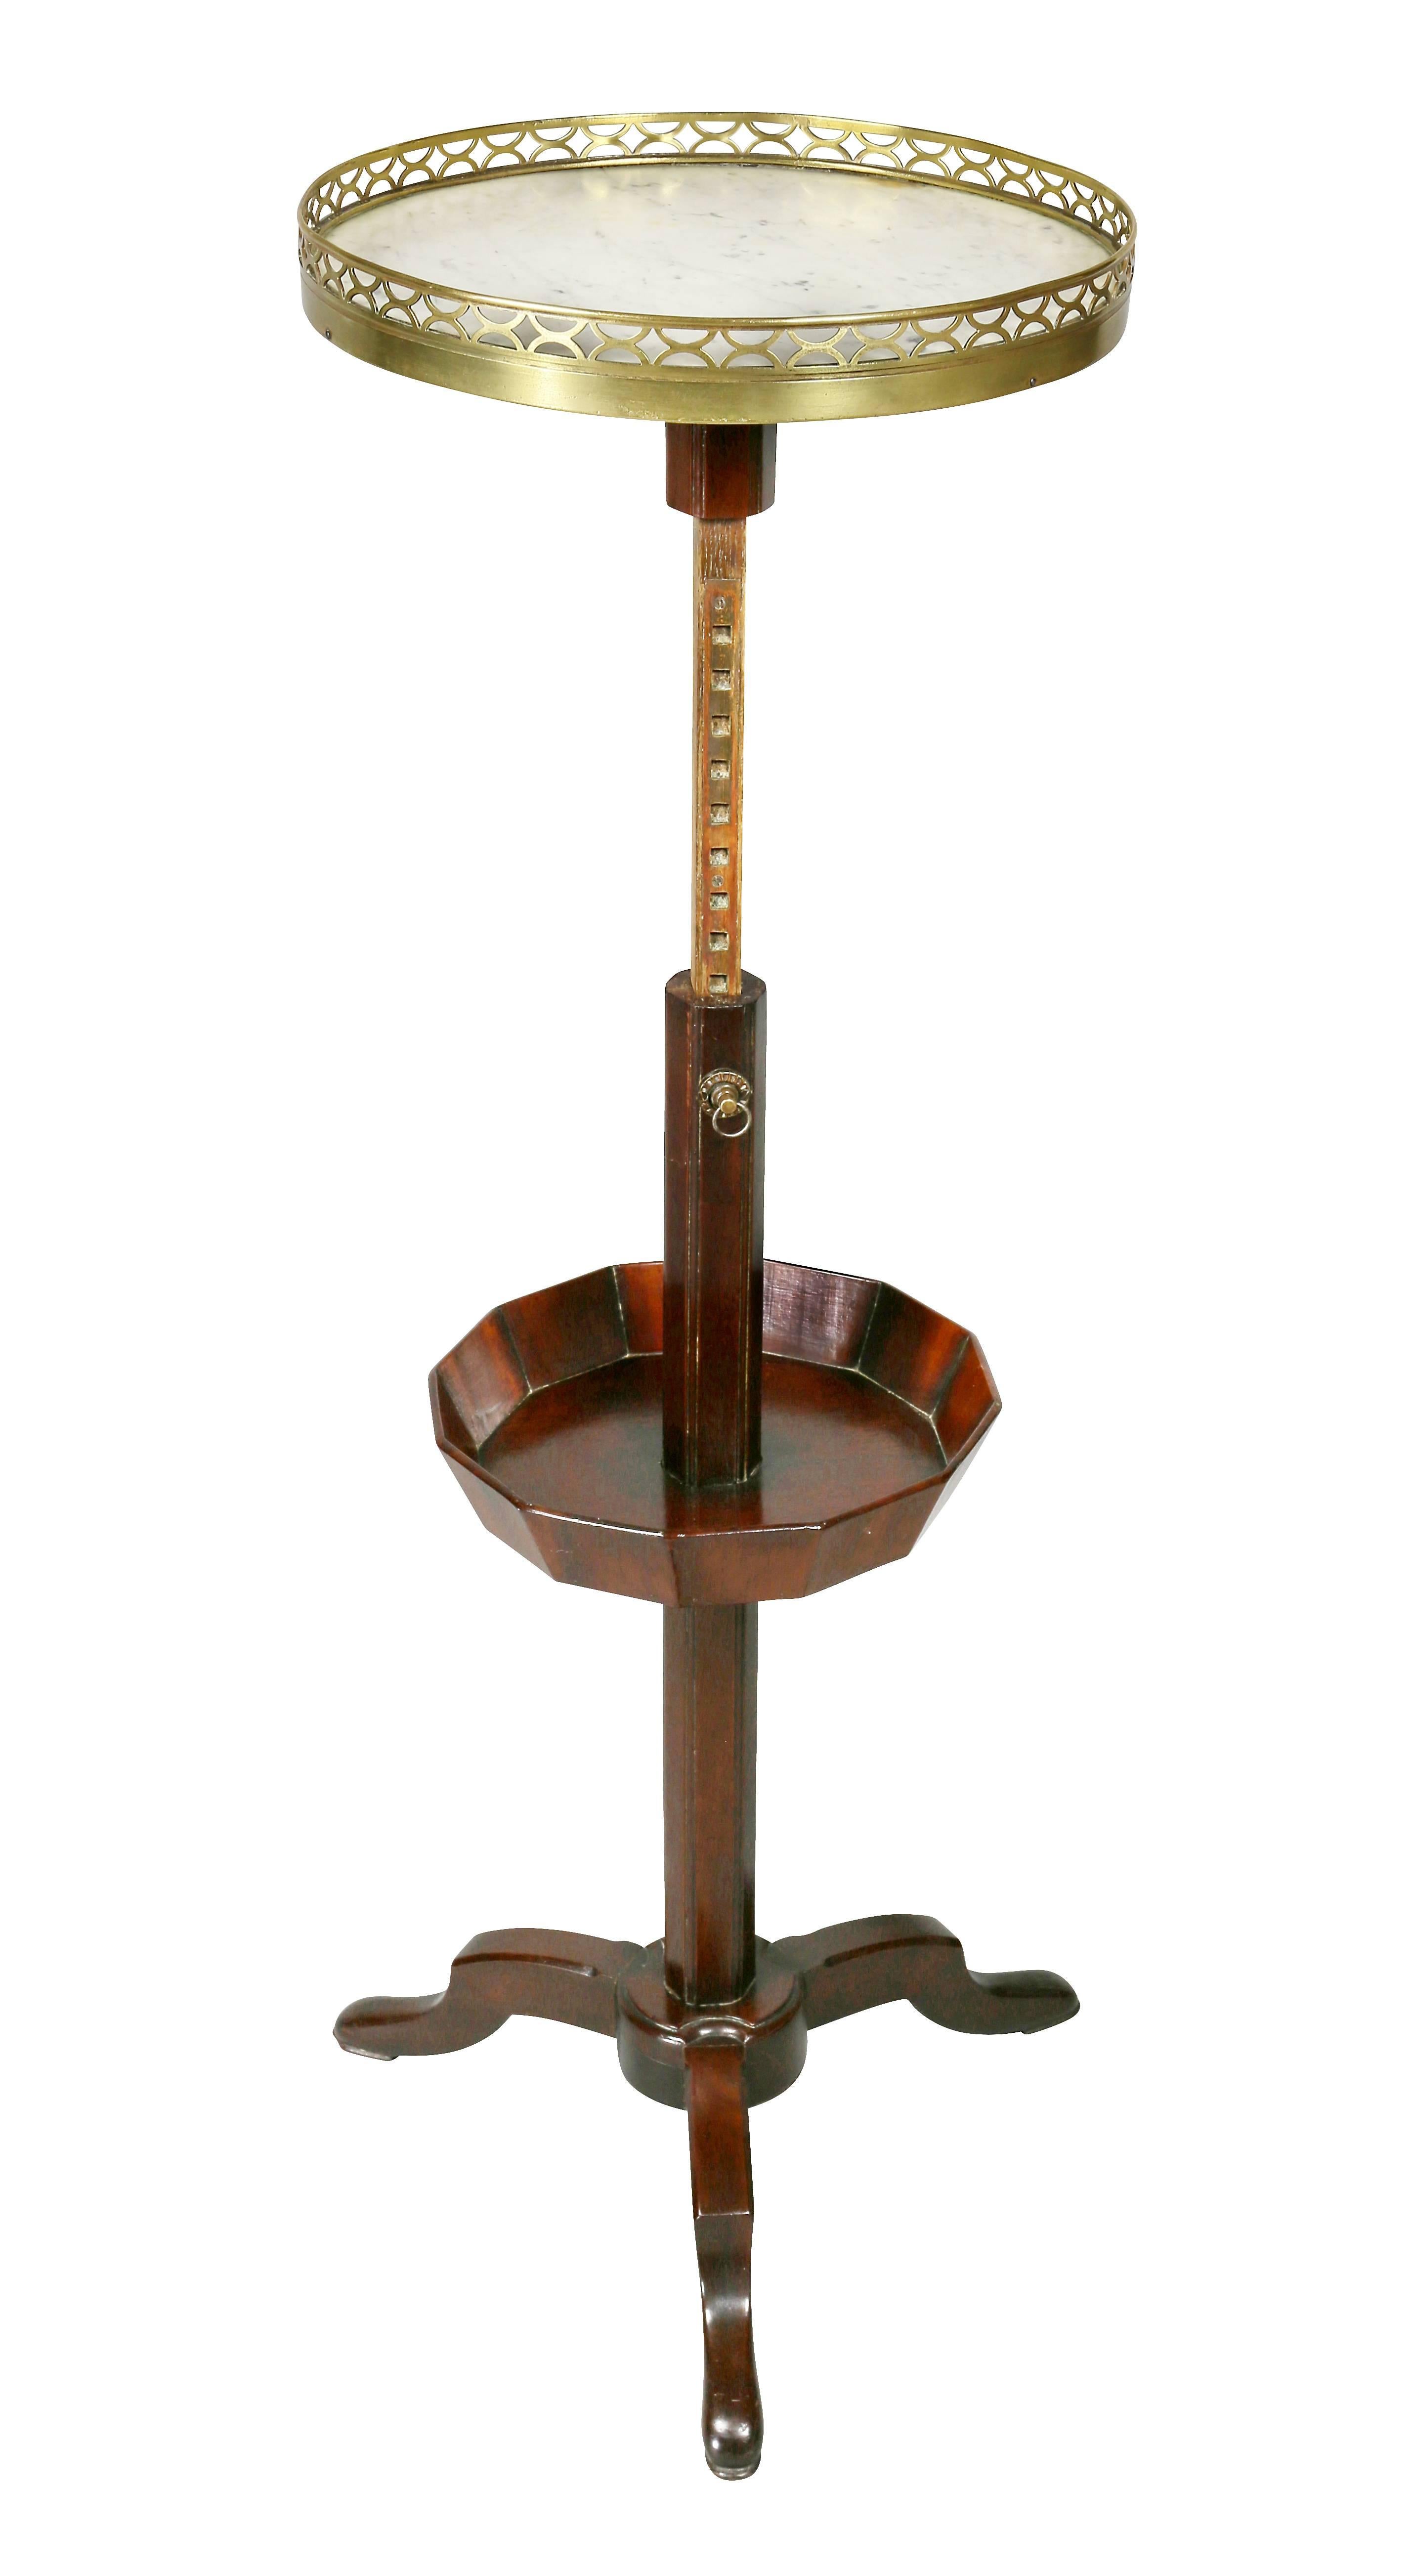 Signed Bailly on underside of base circular white marble top and brass gallery with adjustable ratcheted support with lower basket and raised on tripod base.